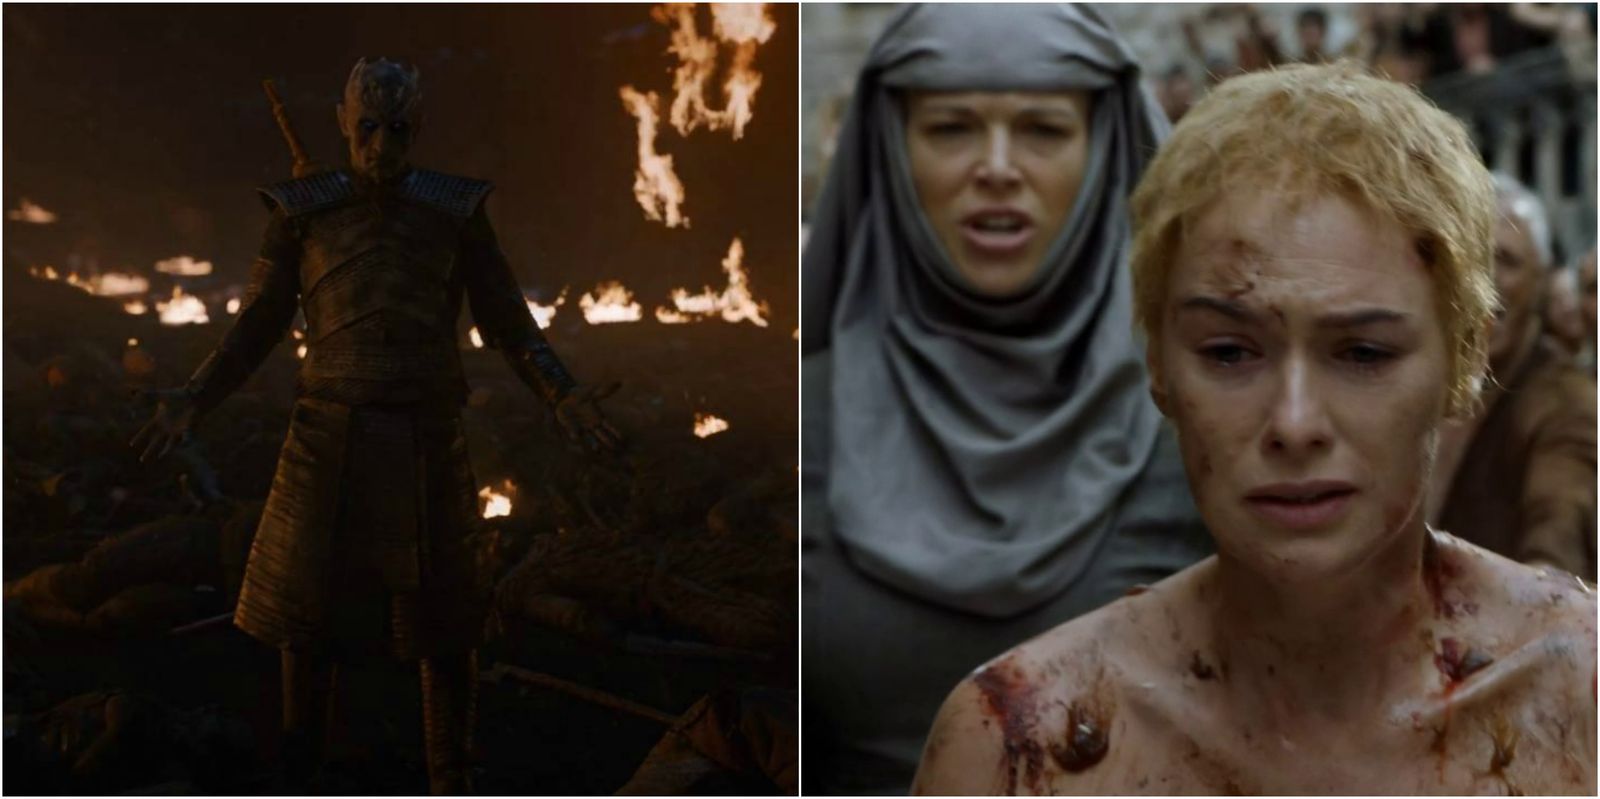 RANKED: The Most Watched Episodes Of Game Of Thrones That Fans Swear By